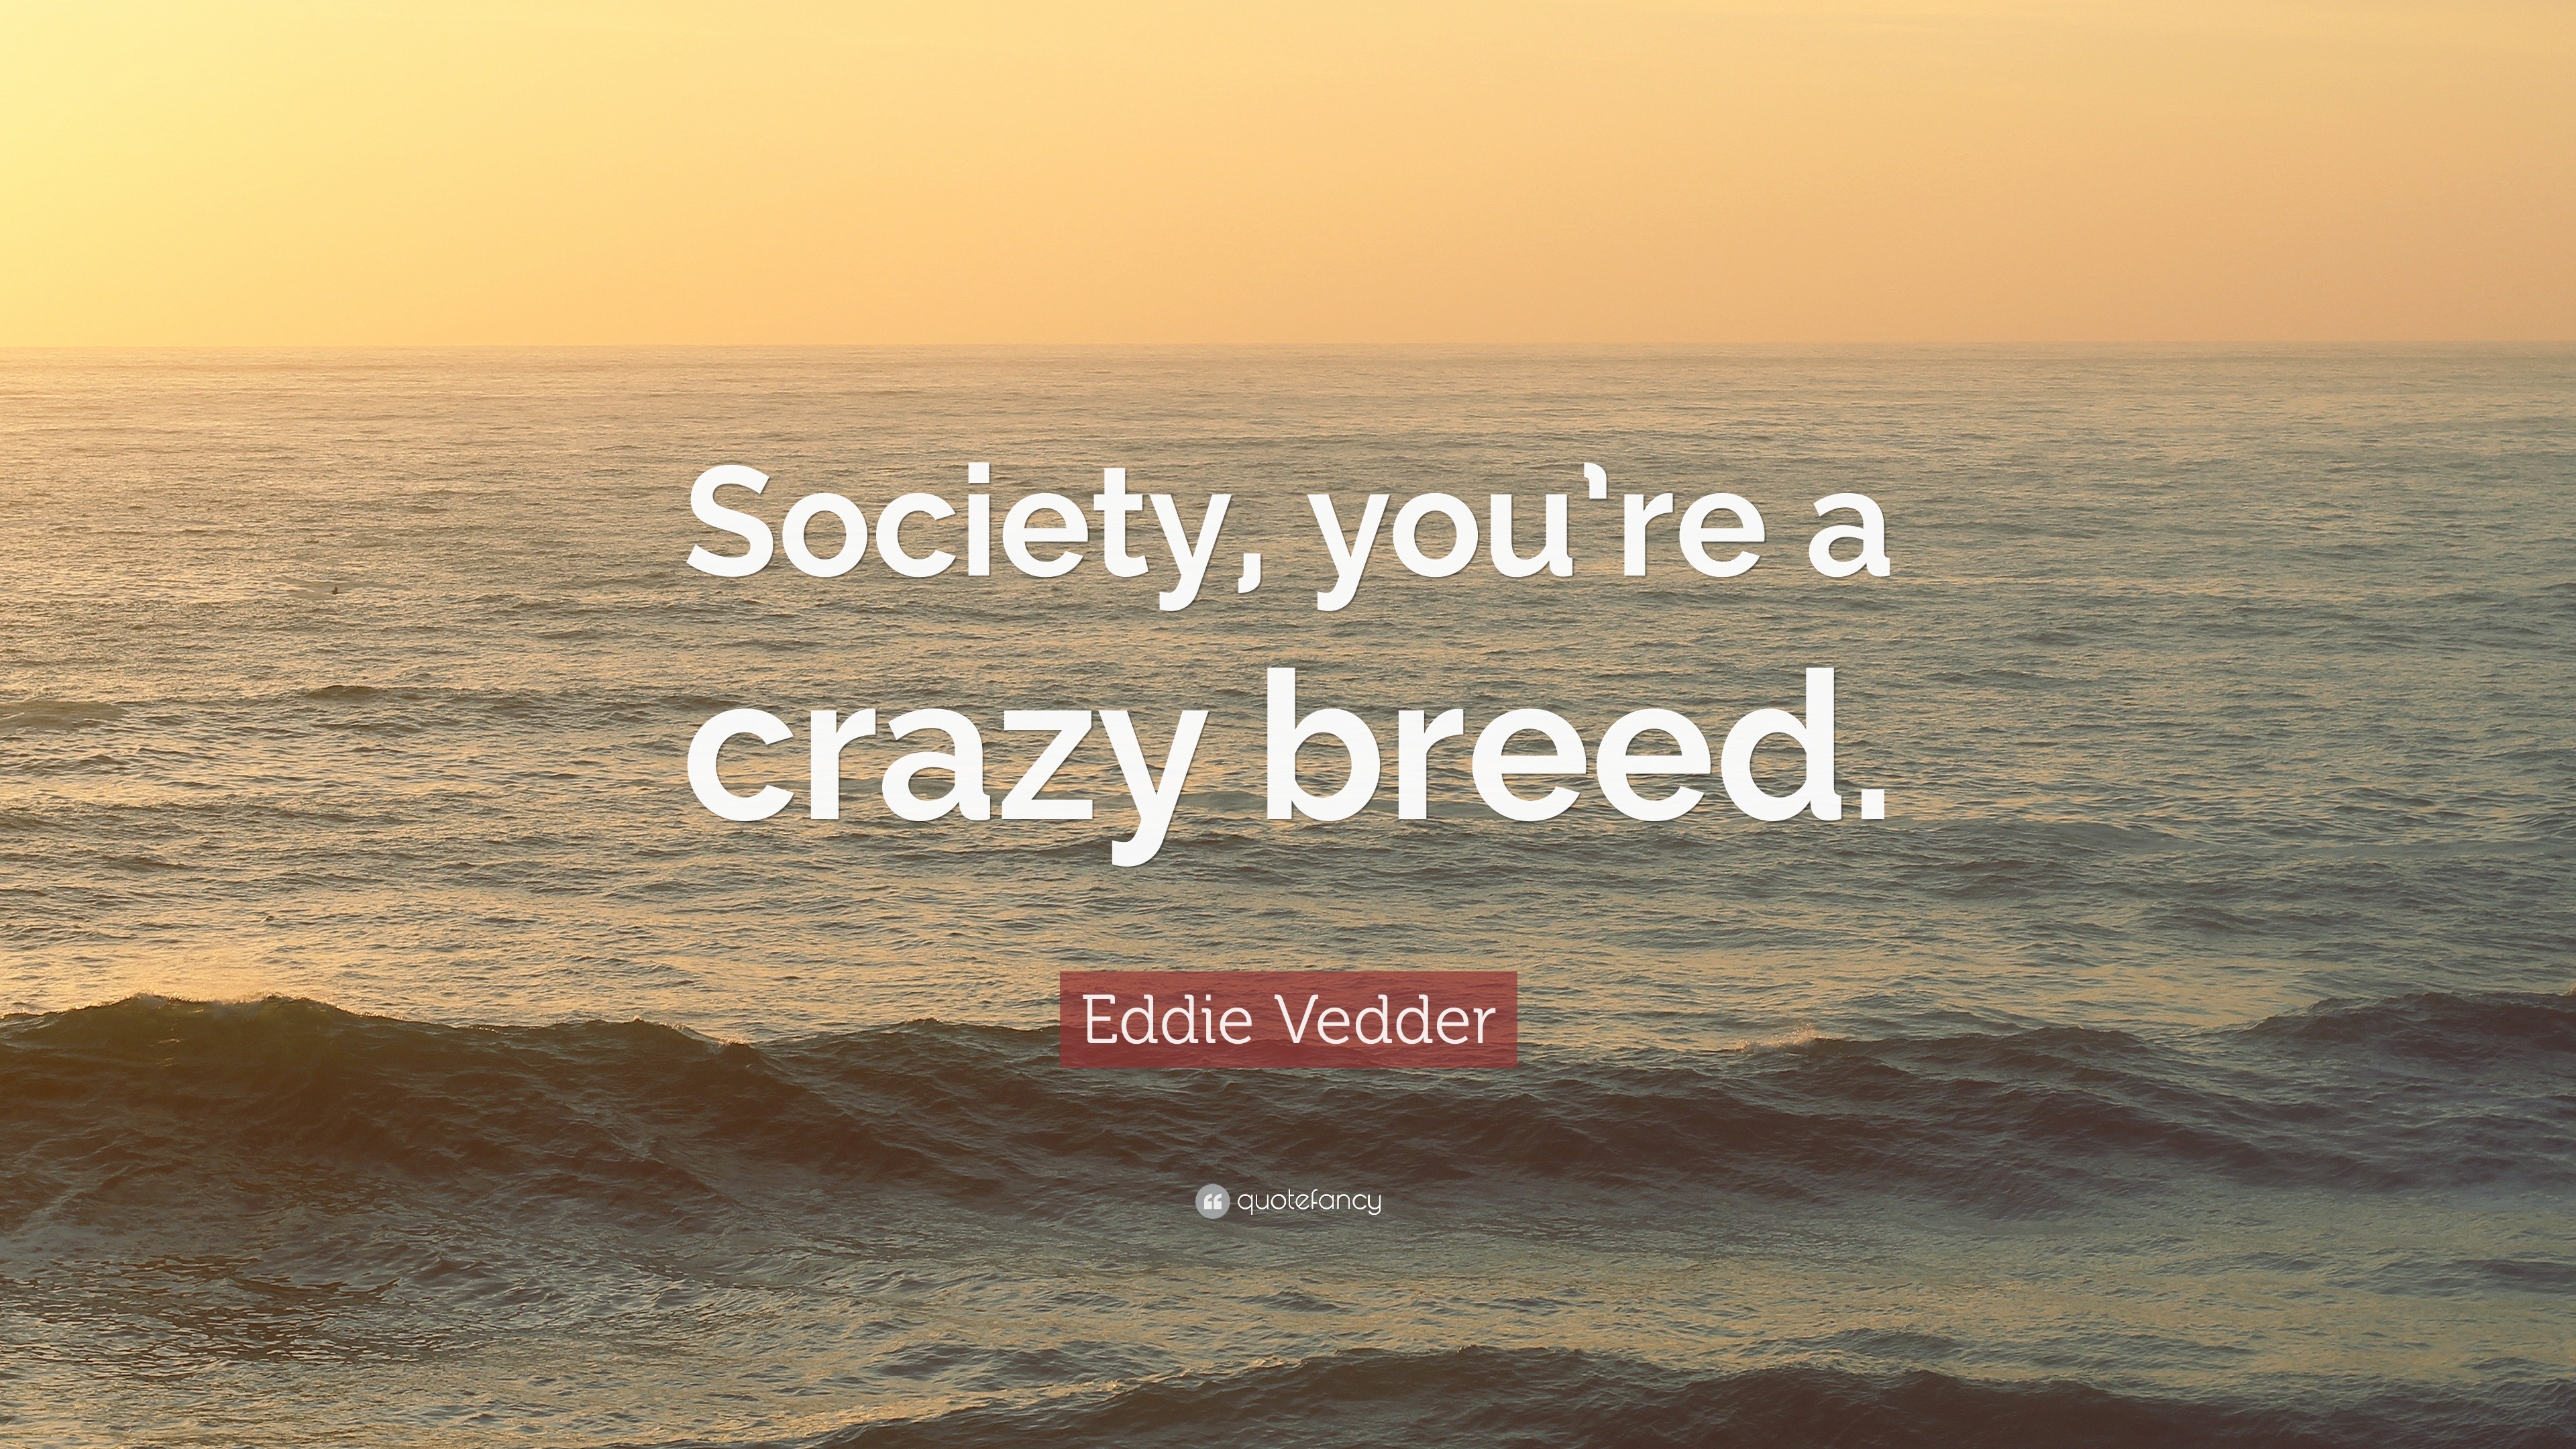 Eddie Vedder Quote: "Society, you're a crazy breed." (12 ...